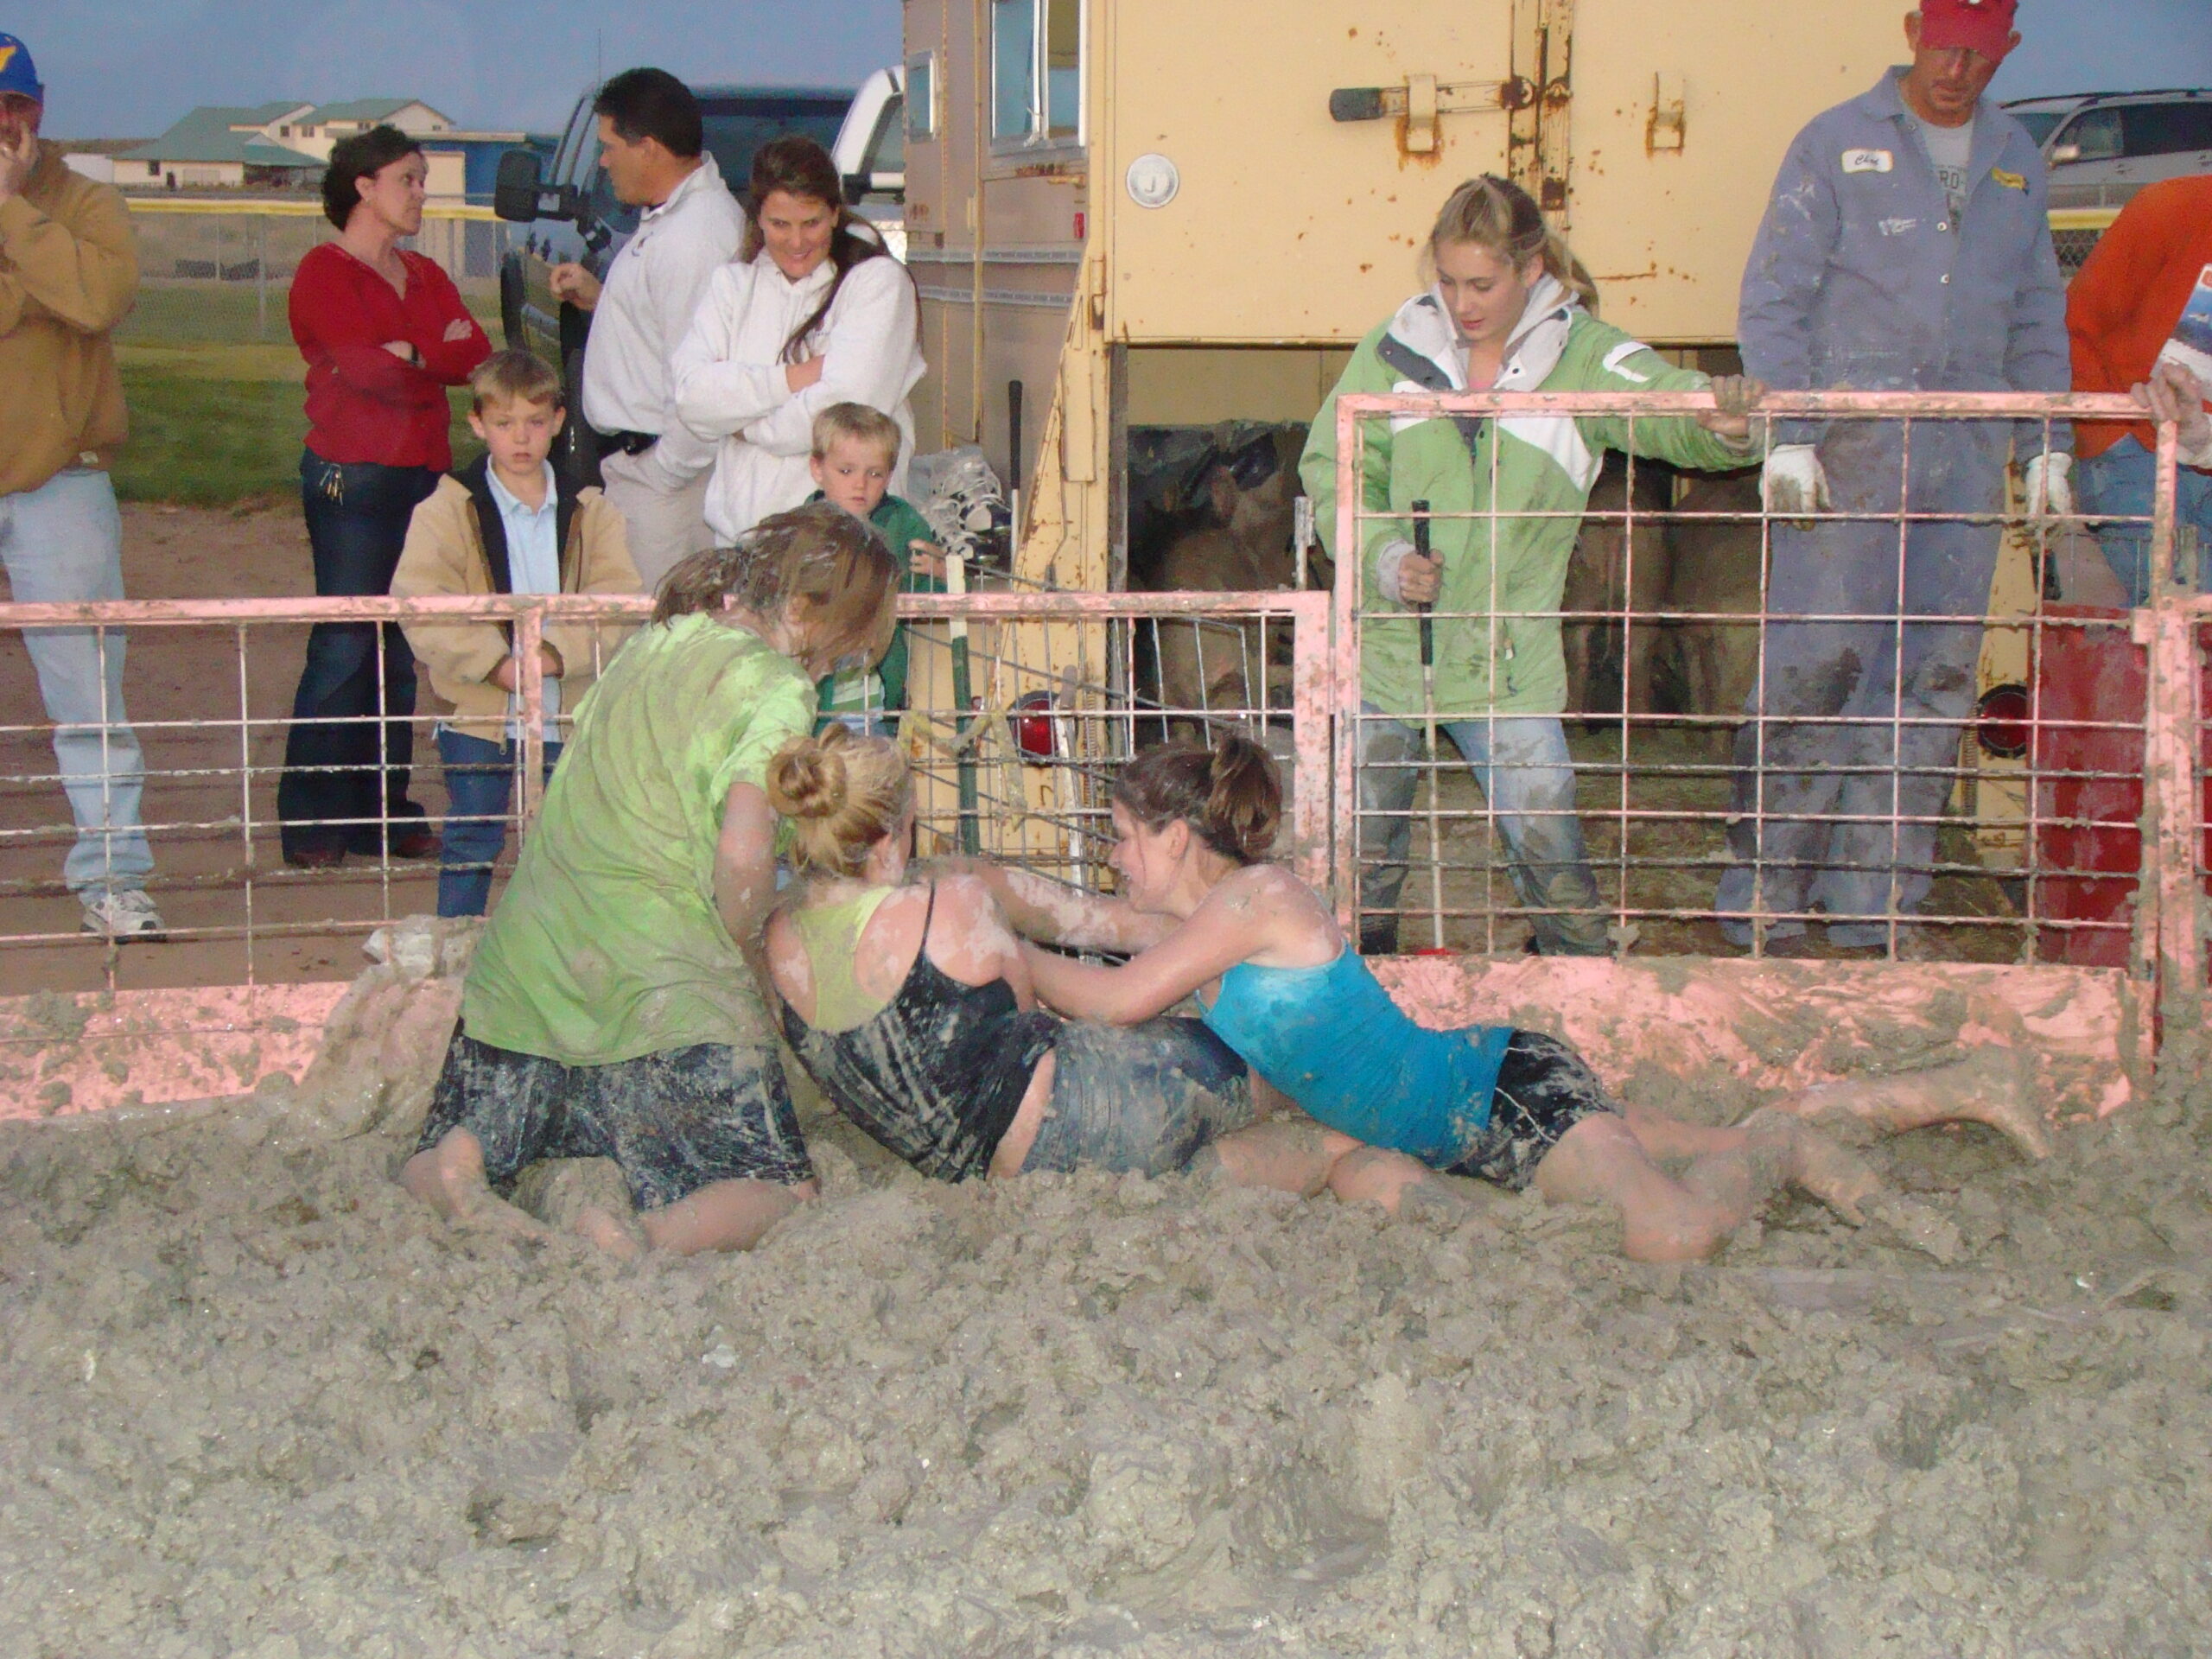 Student participating in pig wrestling during the 2008 Homecoming. /Ron Espinola • The Brand